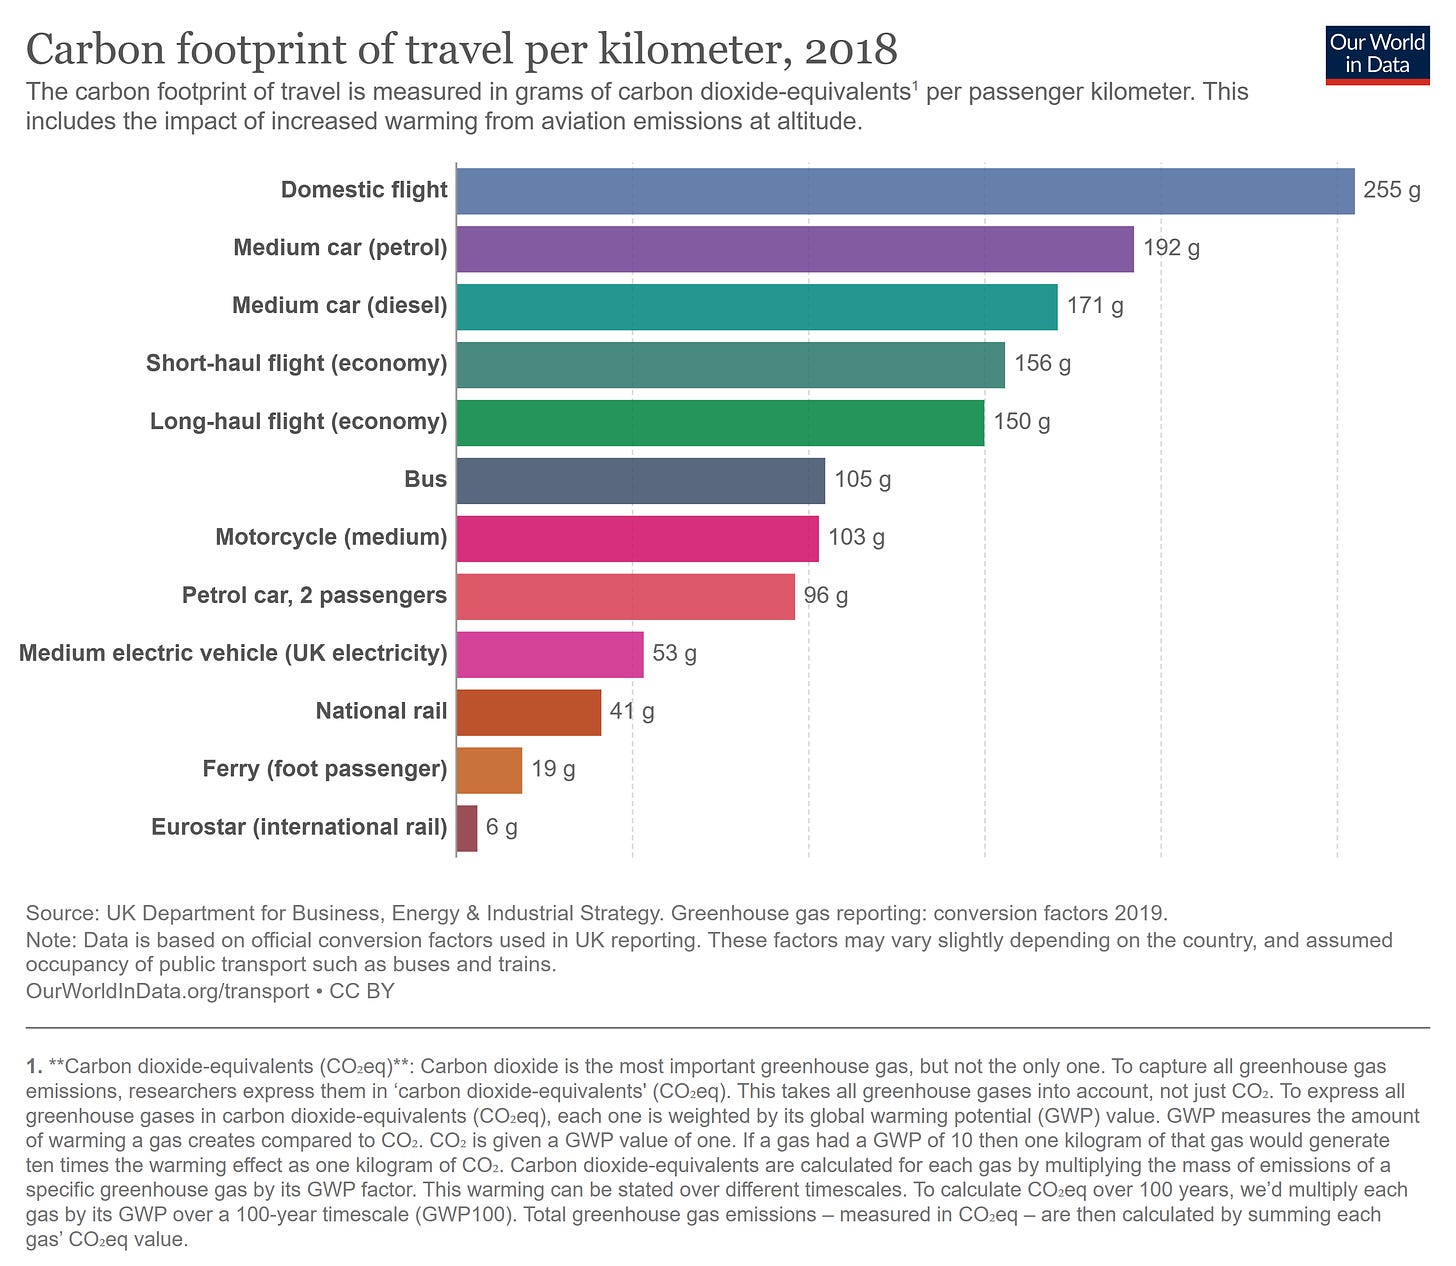 A graph showing the varied carbon footprints of travel per kilometer in 2018, with domestic flights at the top and international rail on the bottom.